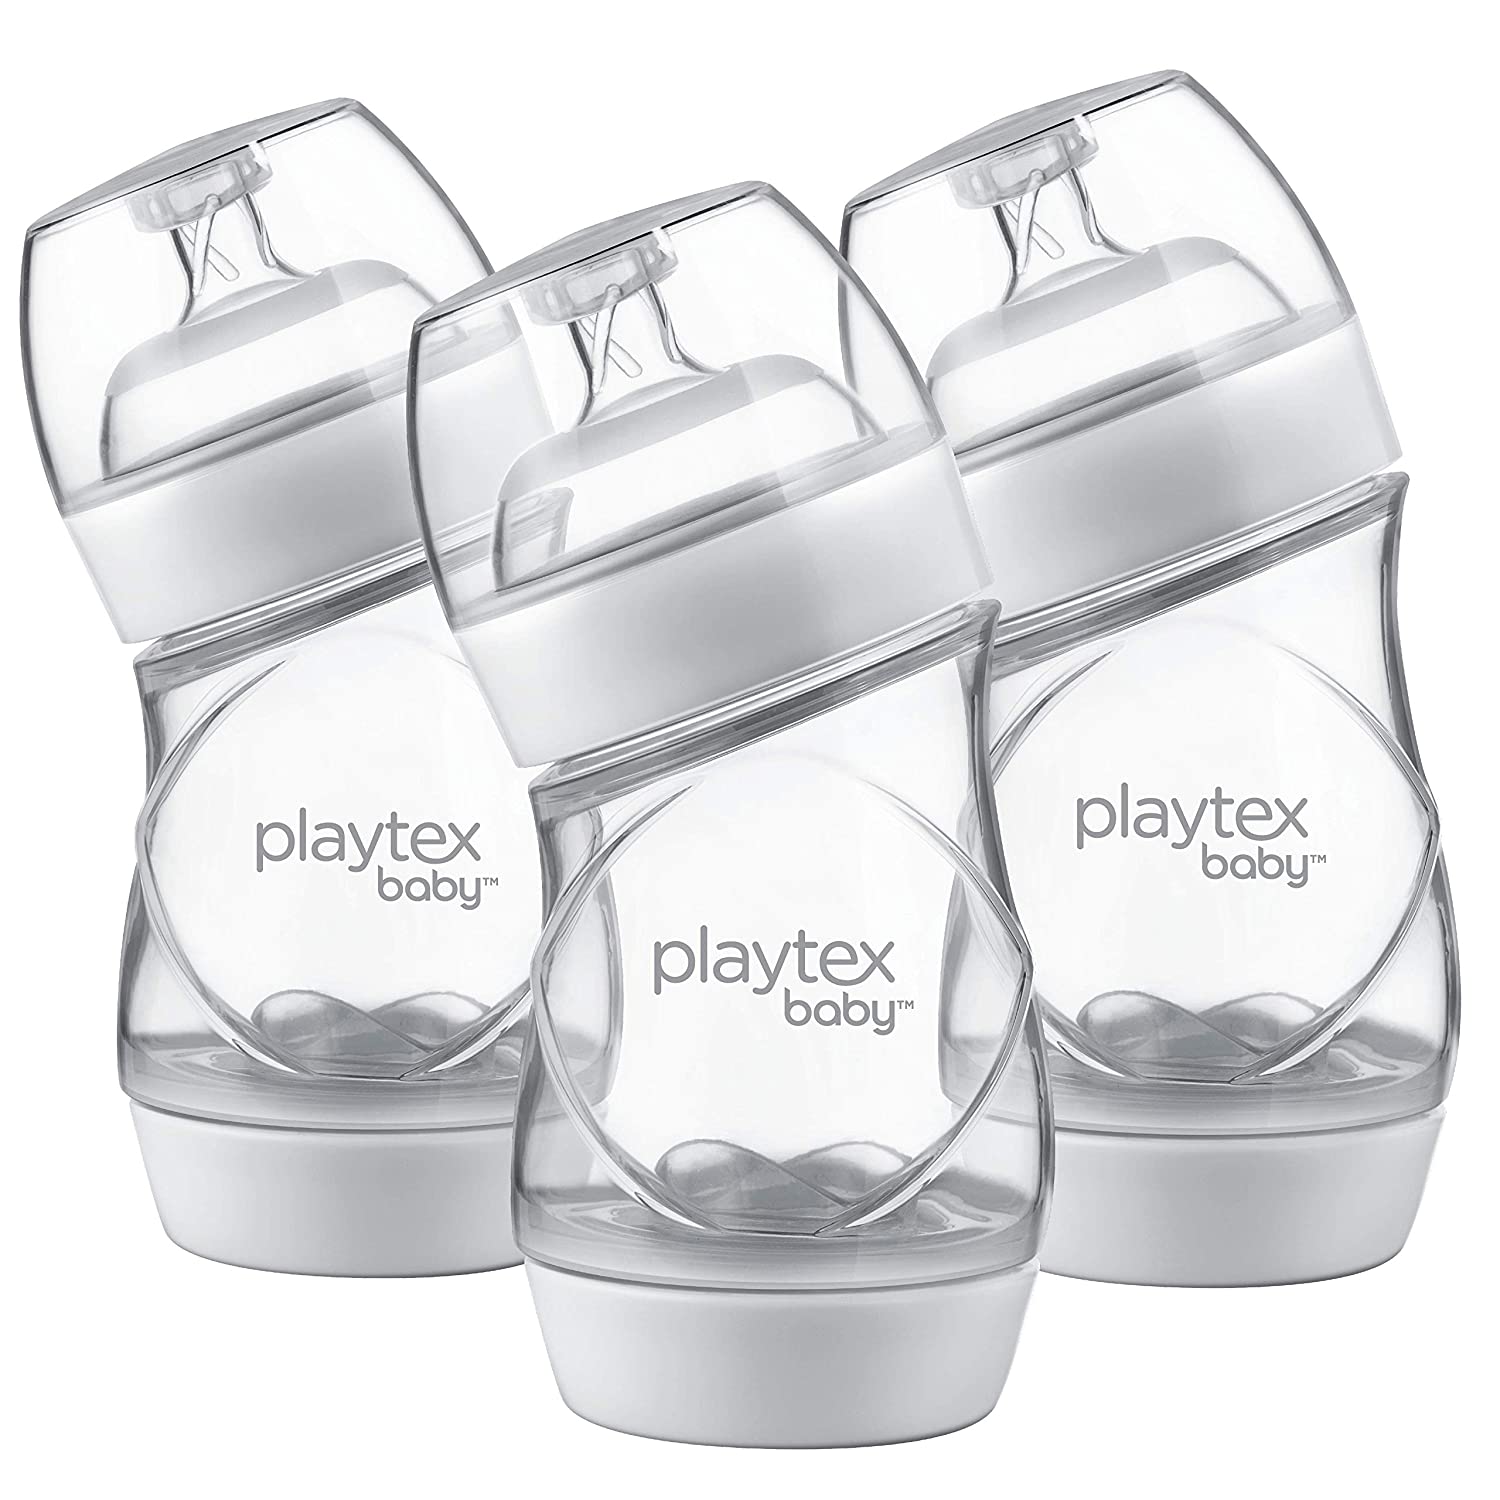 Playtex Baby Ventaire Bottle, Helps Prevent Colic & Reflux, 6 Ounce Bottles, 3Count